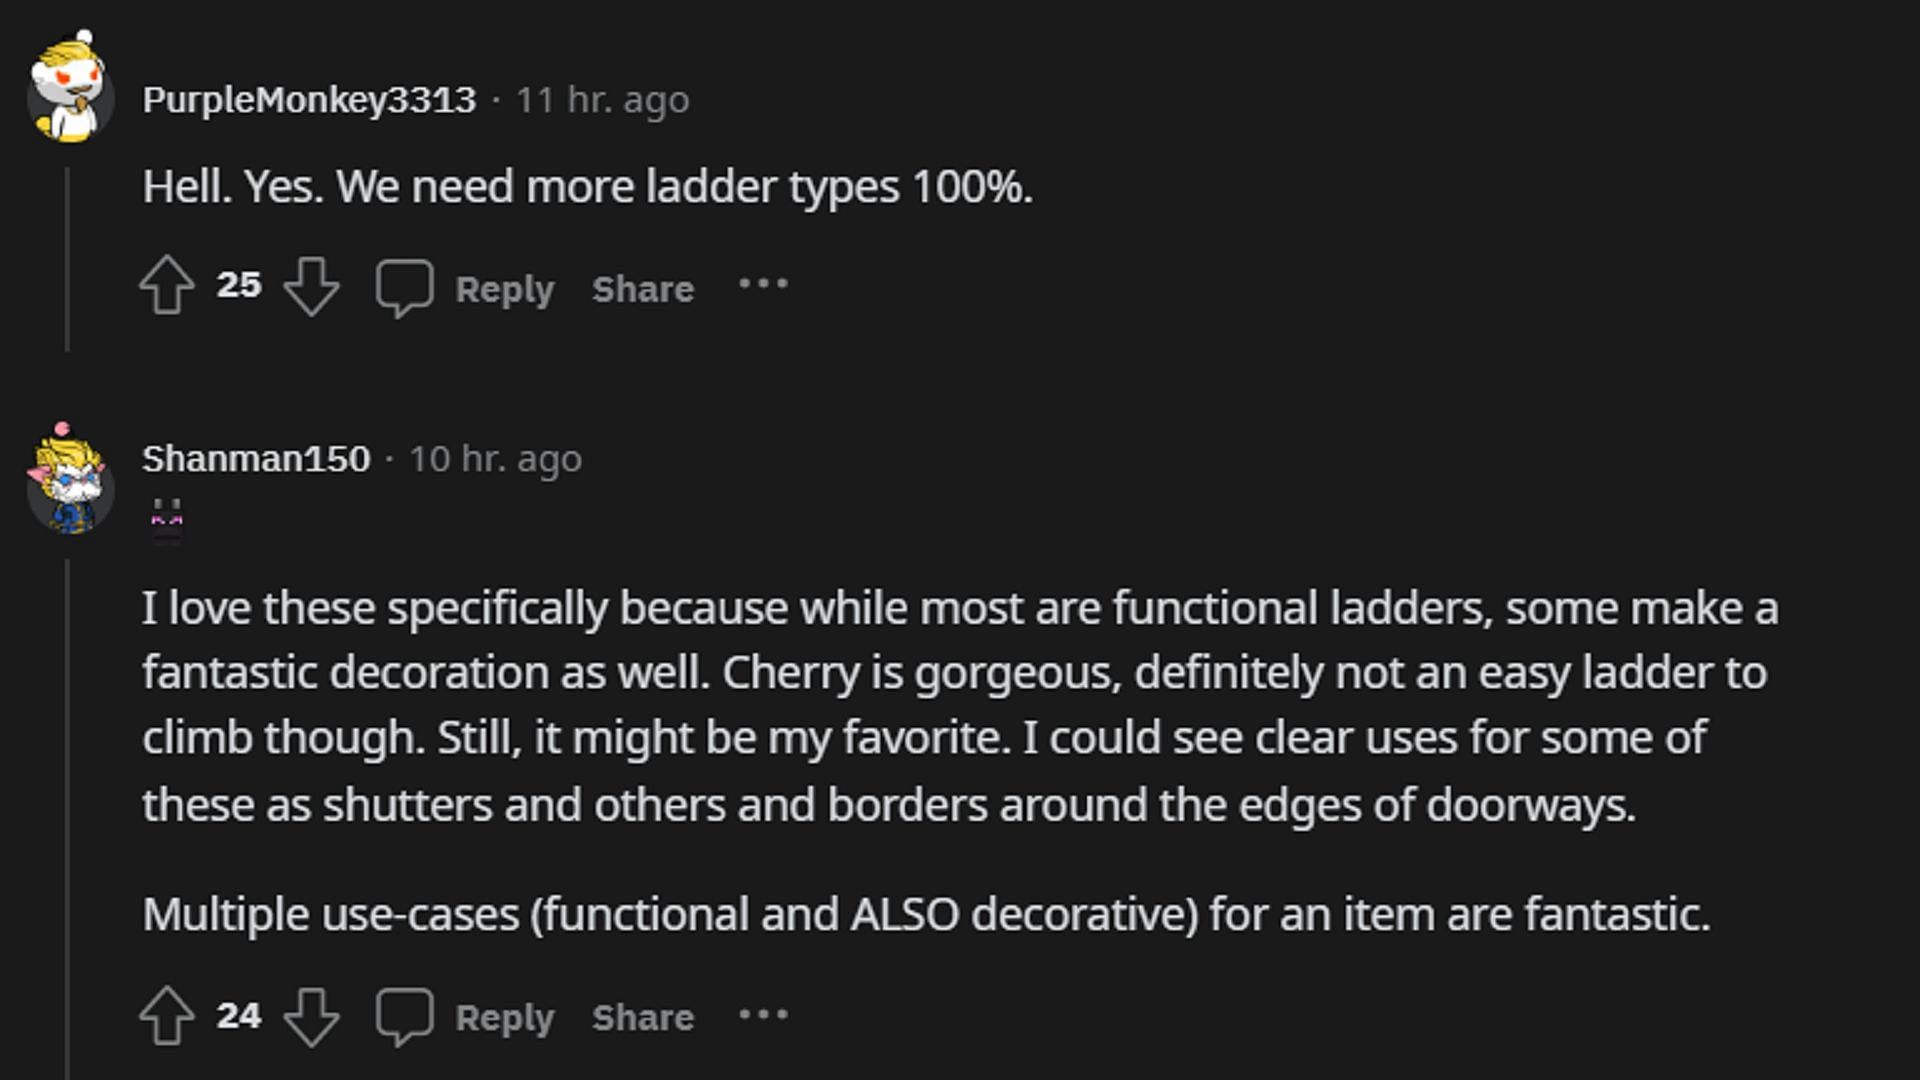 Minecraft fans would clearly love more ladder types available in the game (Image via Reddit)